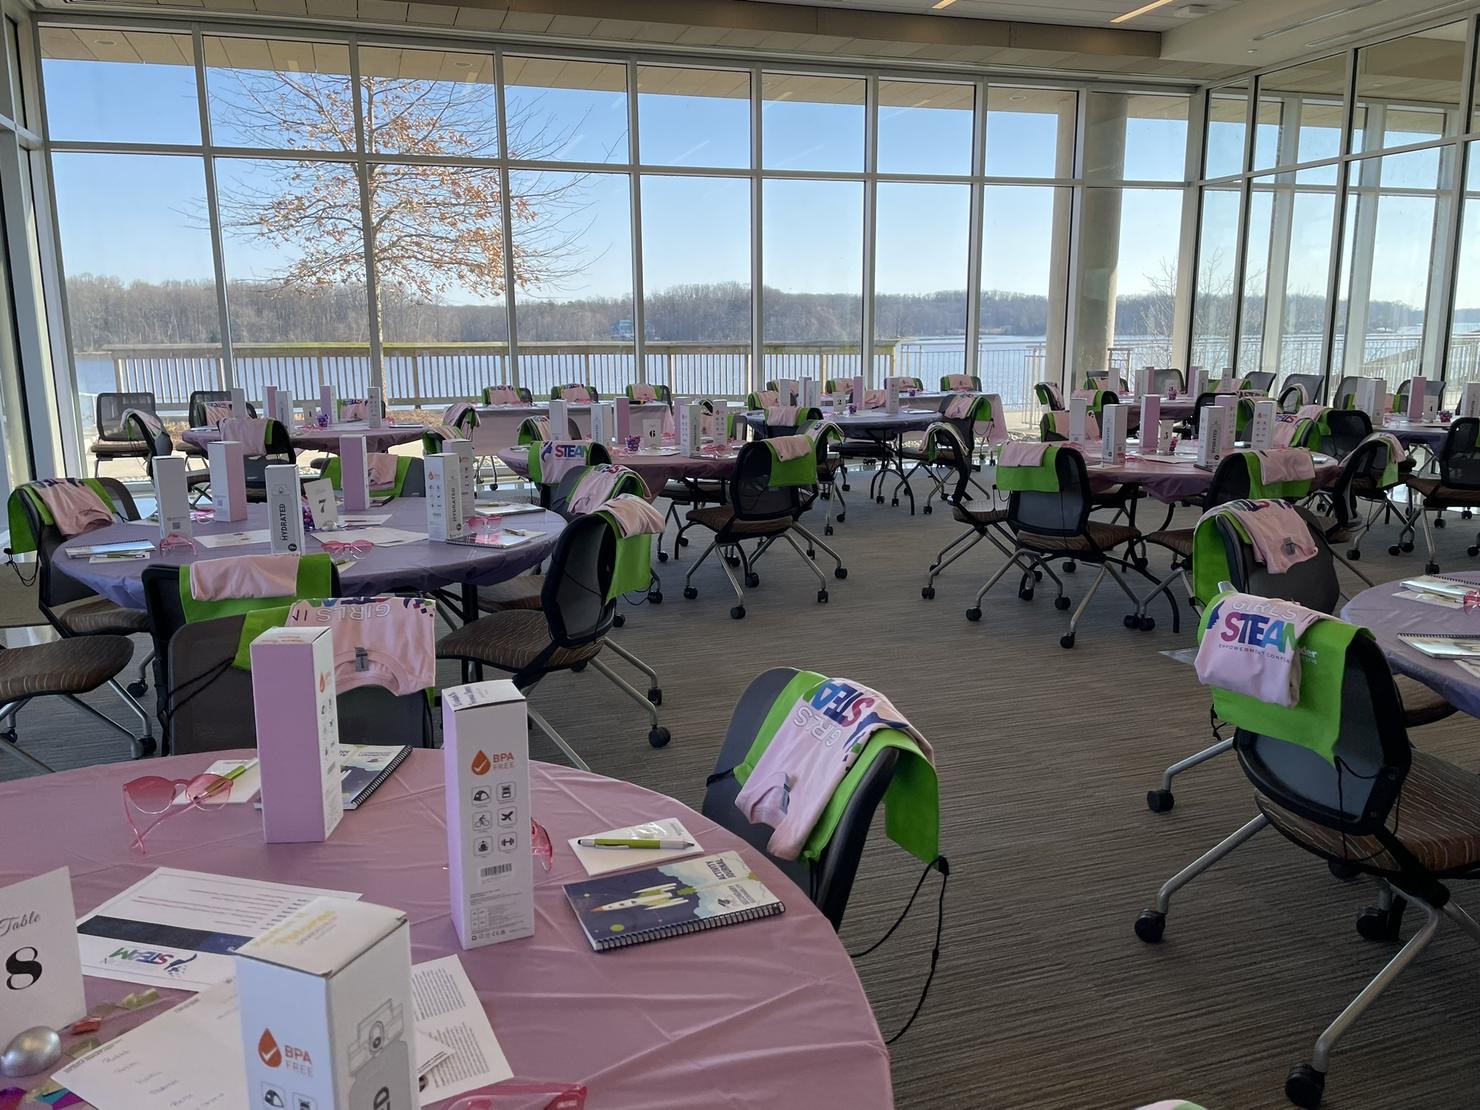 Room set up for the Girls in STEAM conference overlooking the waterfront